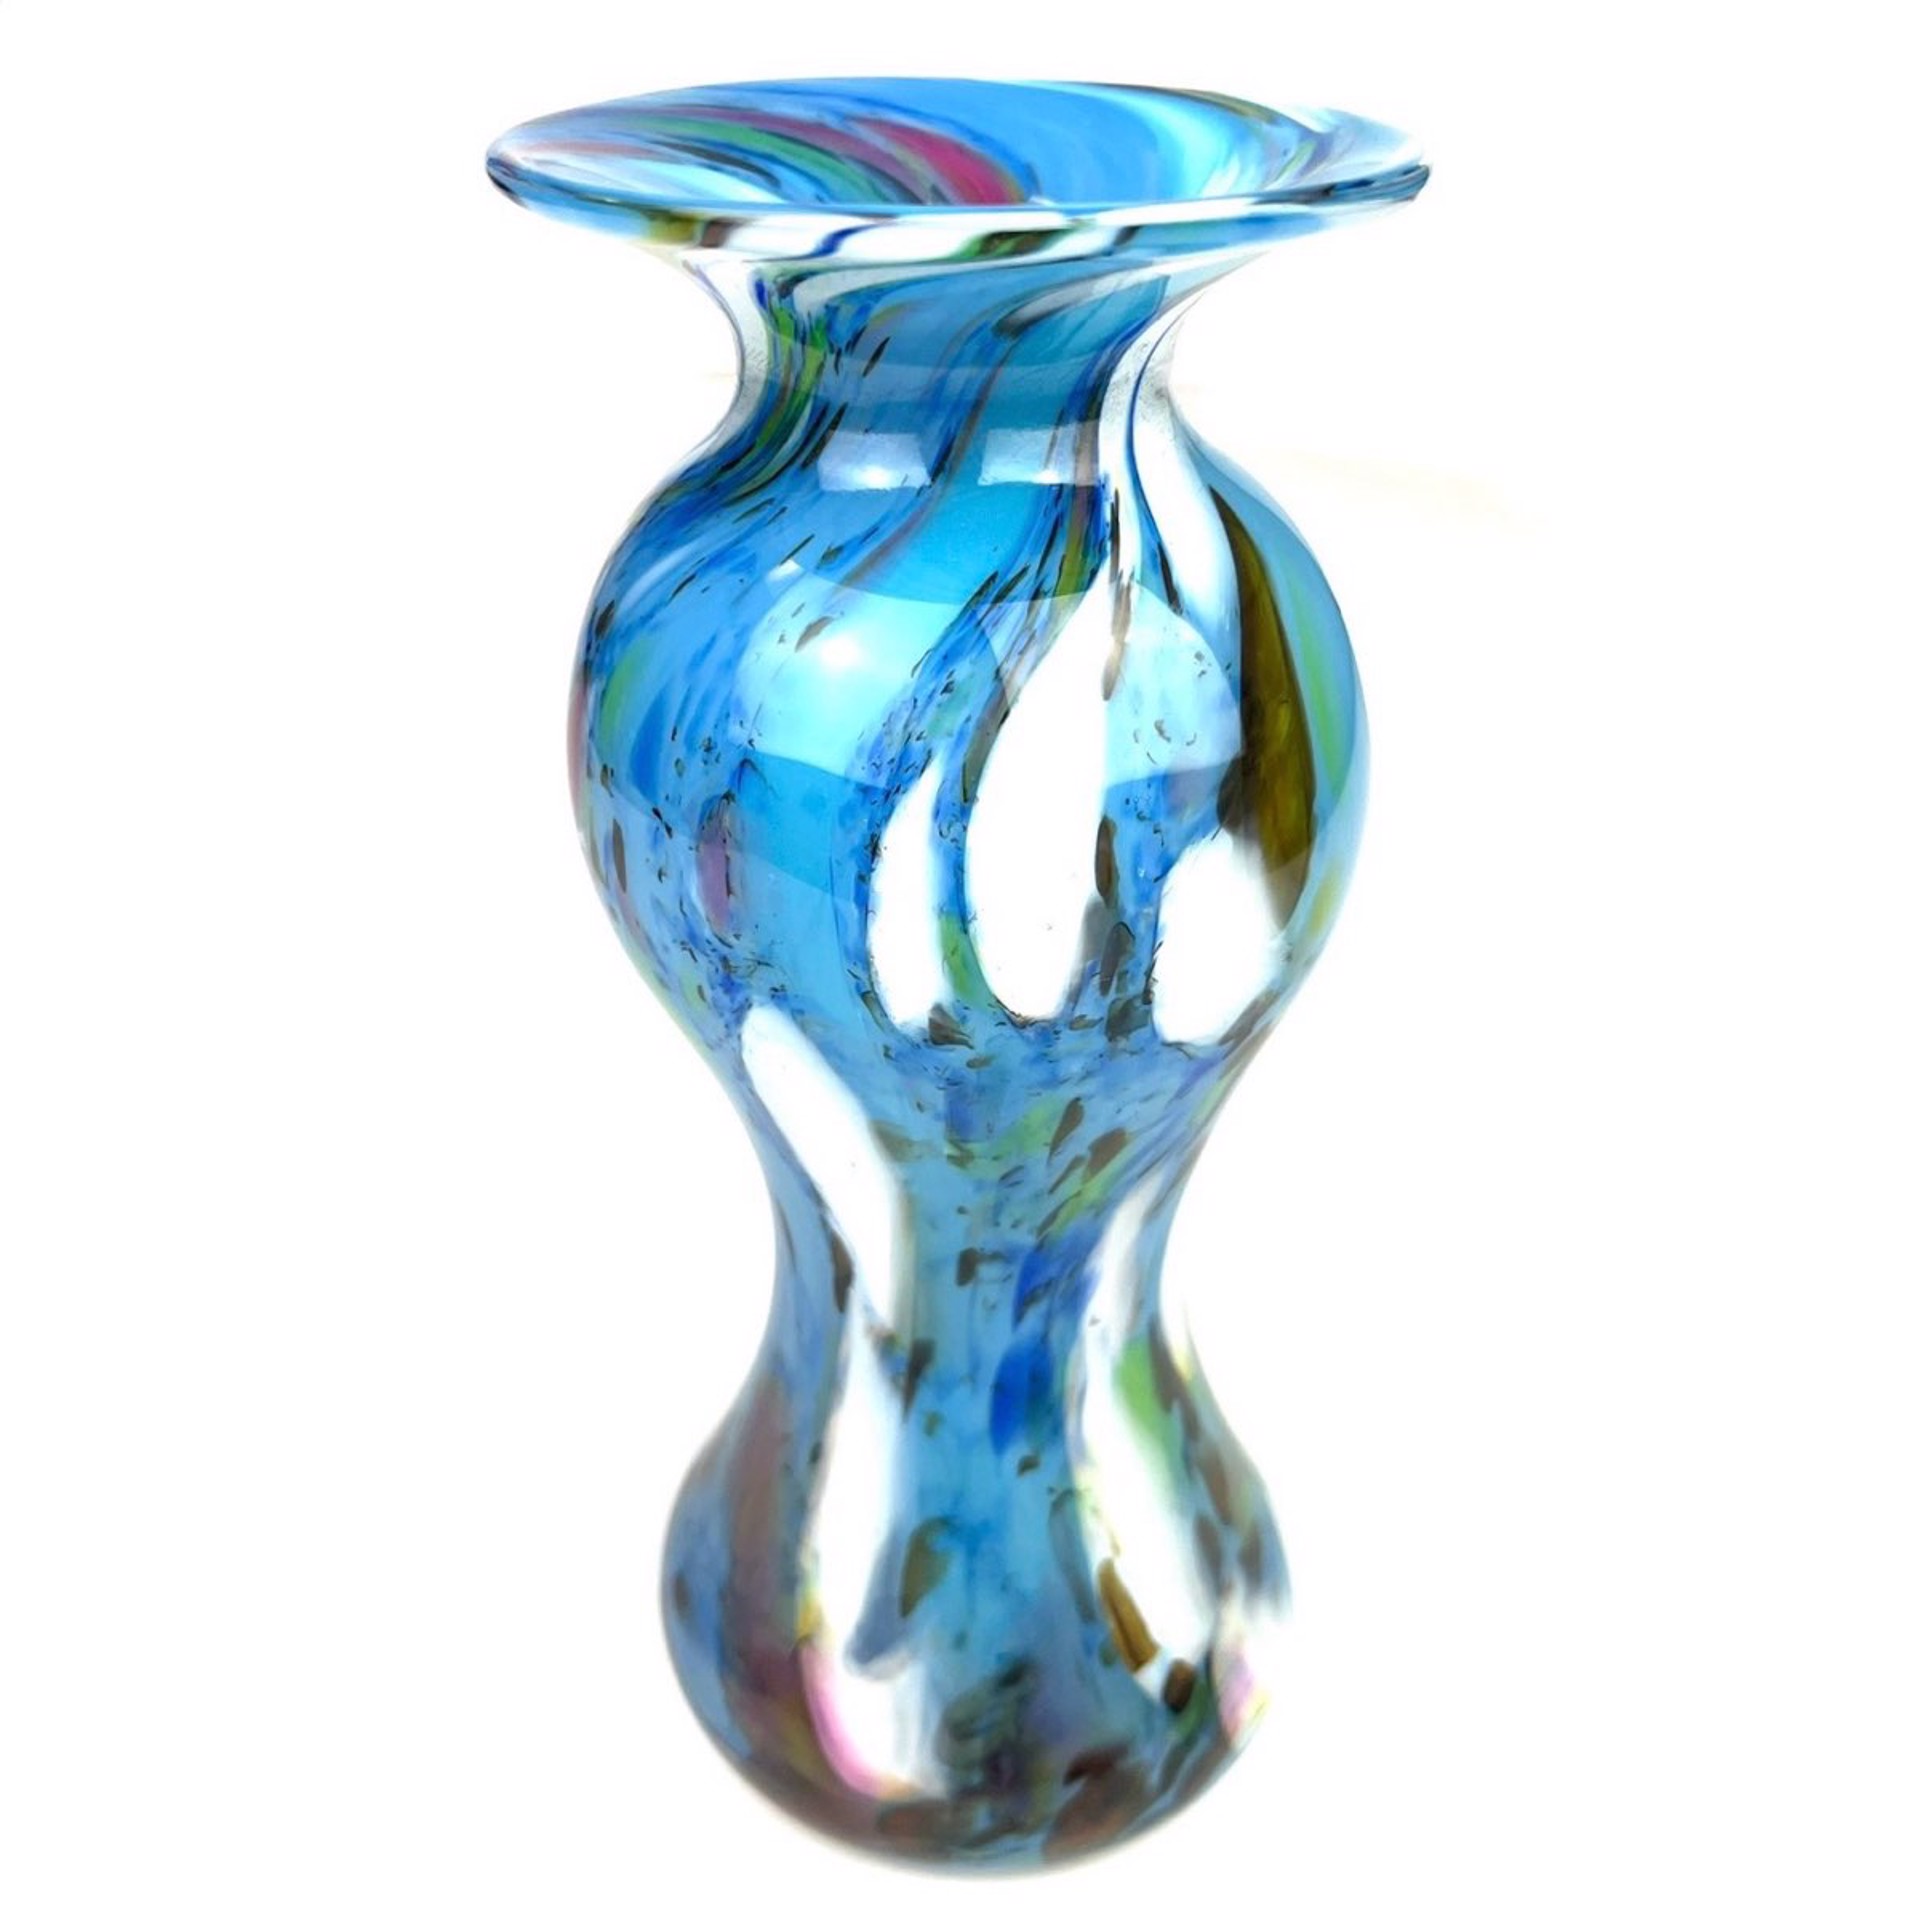 Flora Vase by Chad Balster